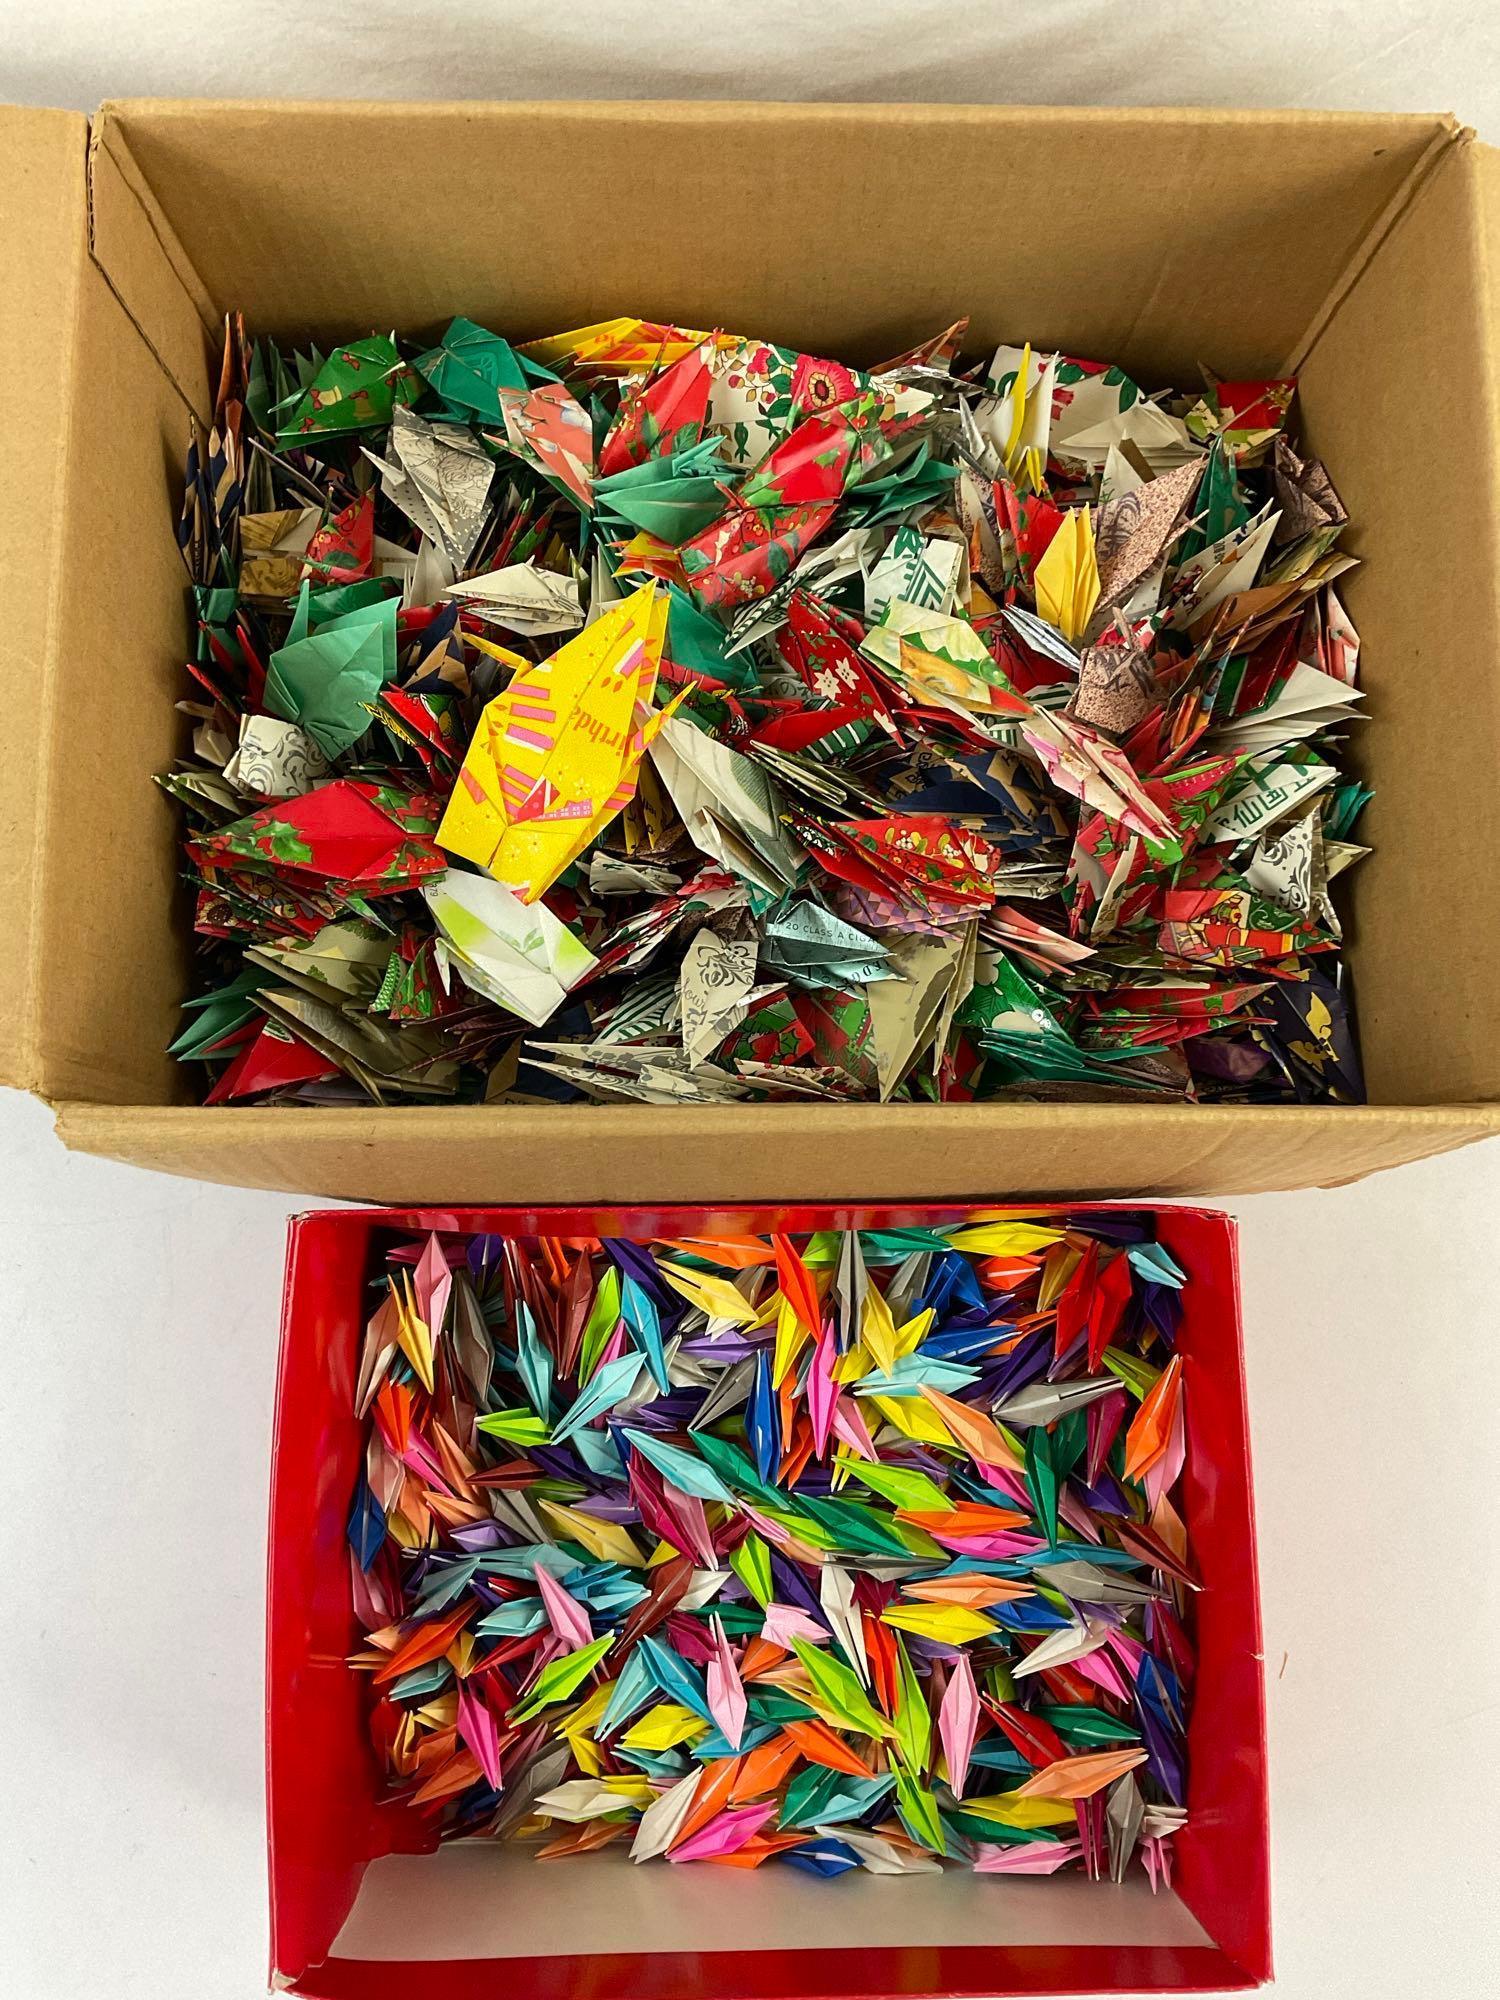 Approx. 1000+ pcs Origami Collection. 1000+ Folded Paper Cranes. Decorated Envelopes. See pics.